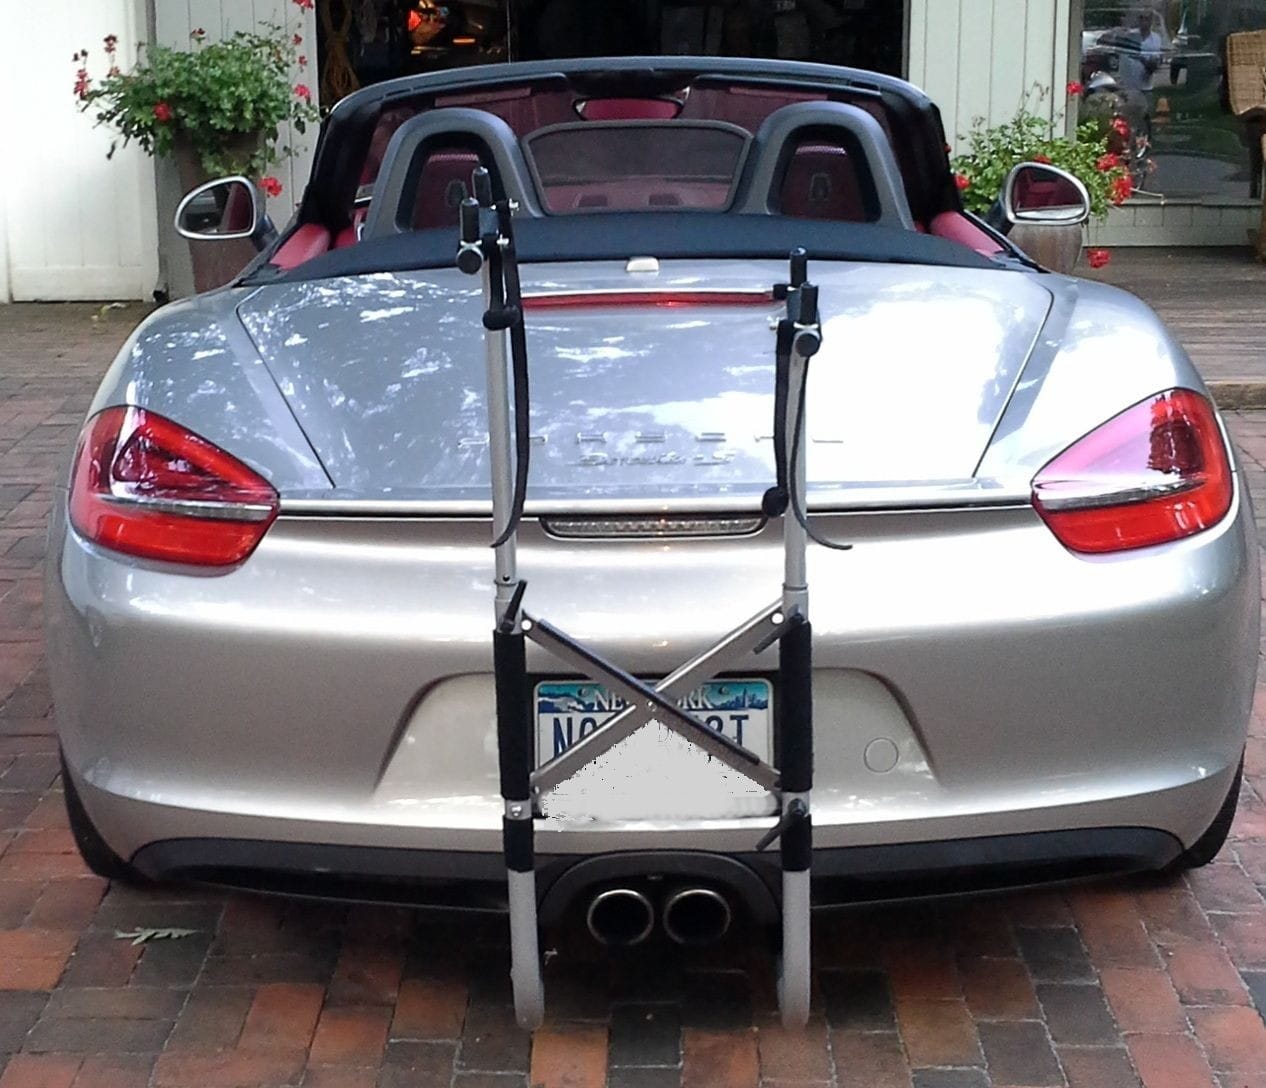 OEM quality Bike Racks, eBike Racks for ALL Porsche Boxsters. 3 minute on/off. Stores inTrunk. No cut, drill, removals to install under car parts. Inconspicuous